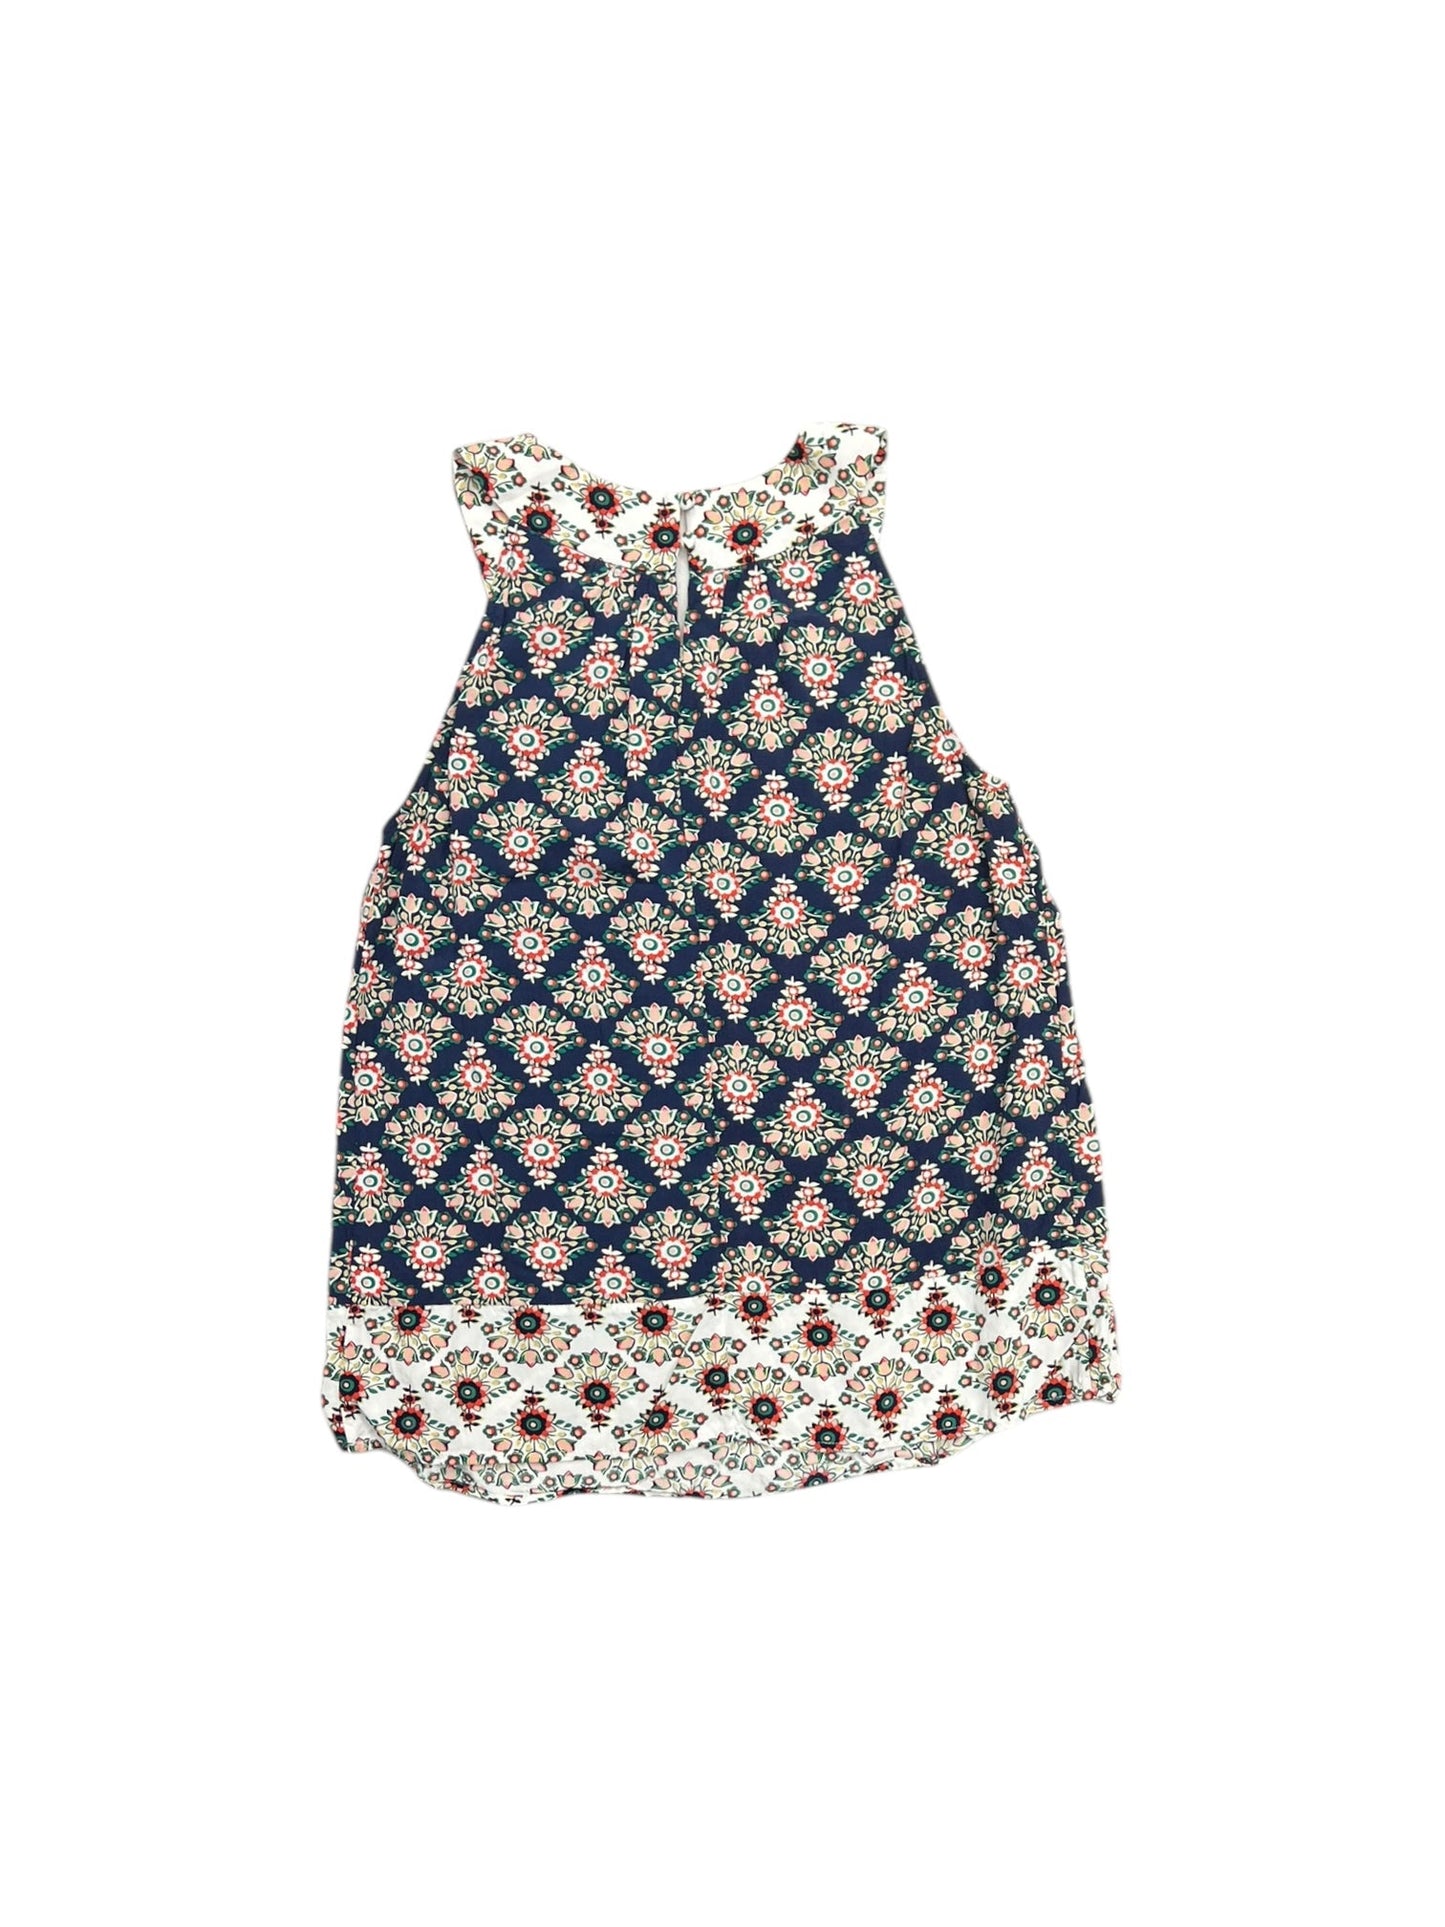 Top Sleeveless By Boden  Size: 6